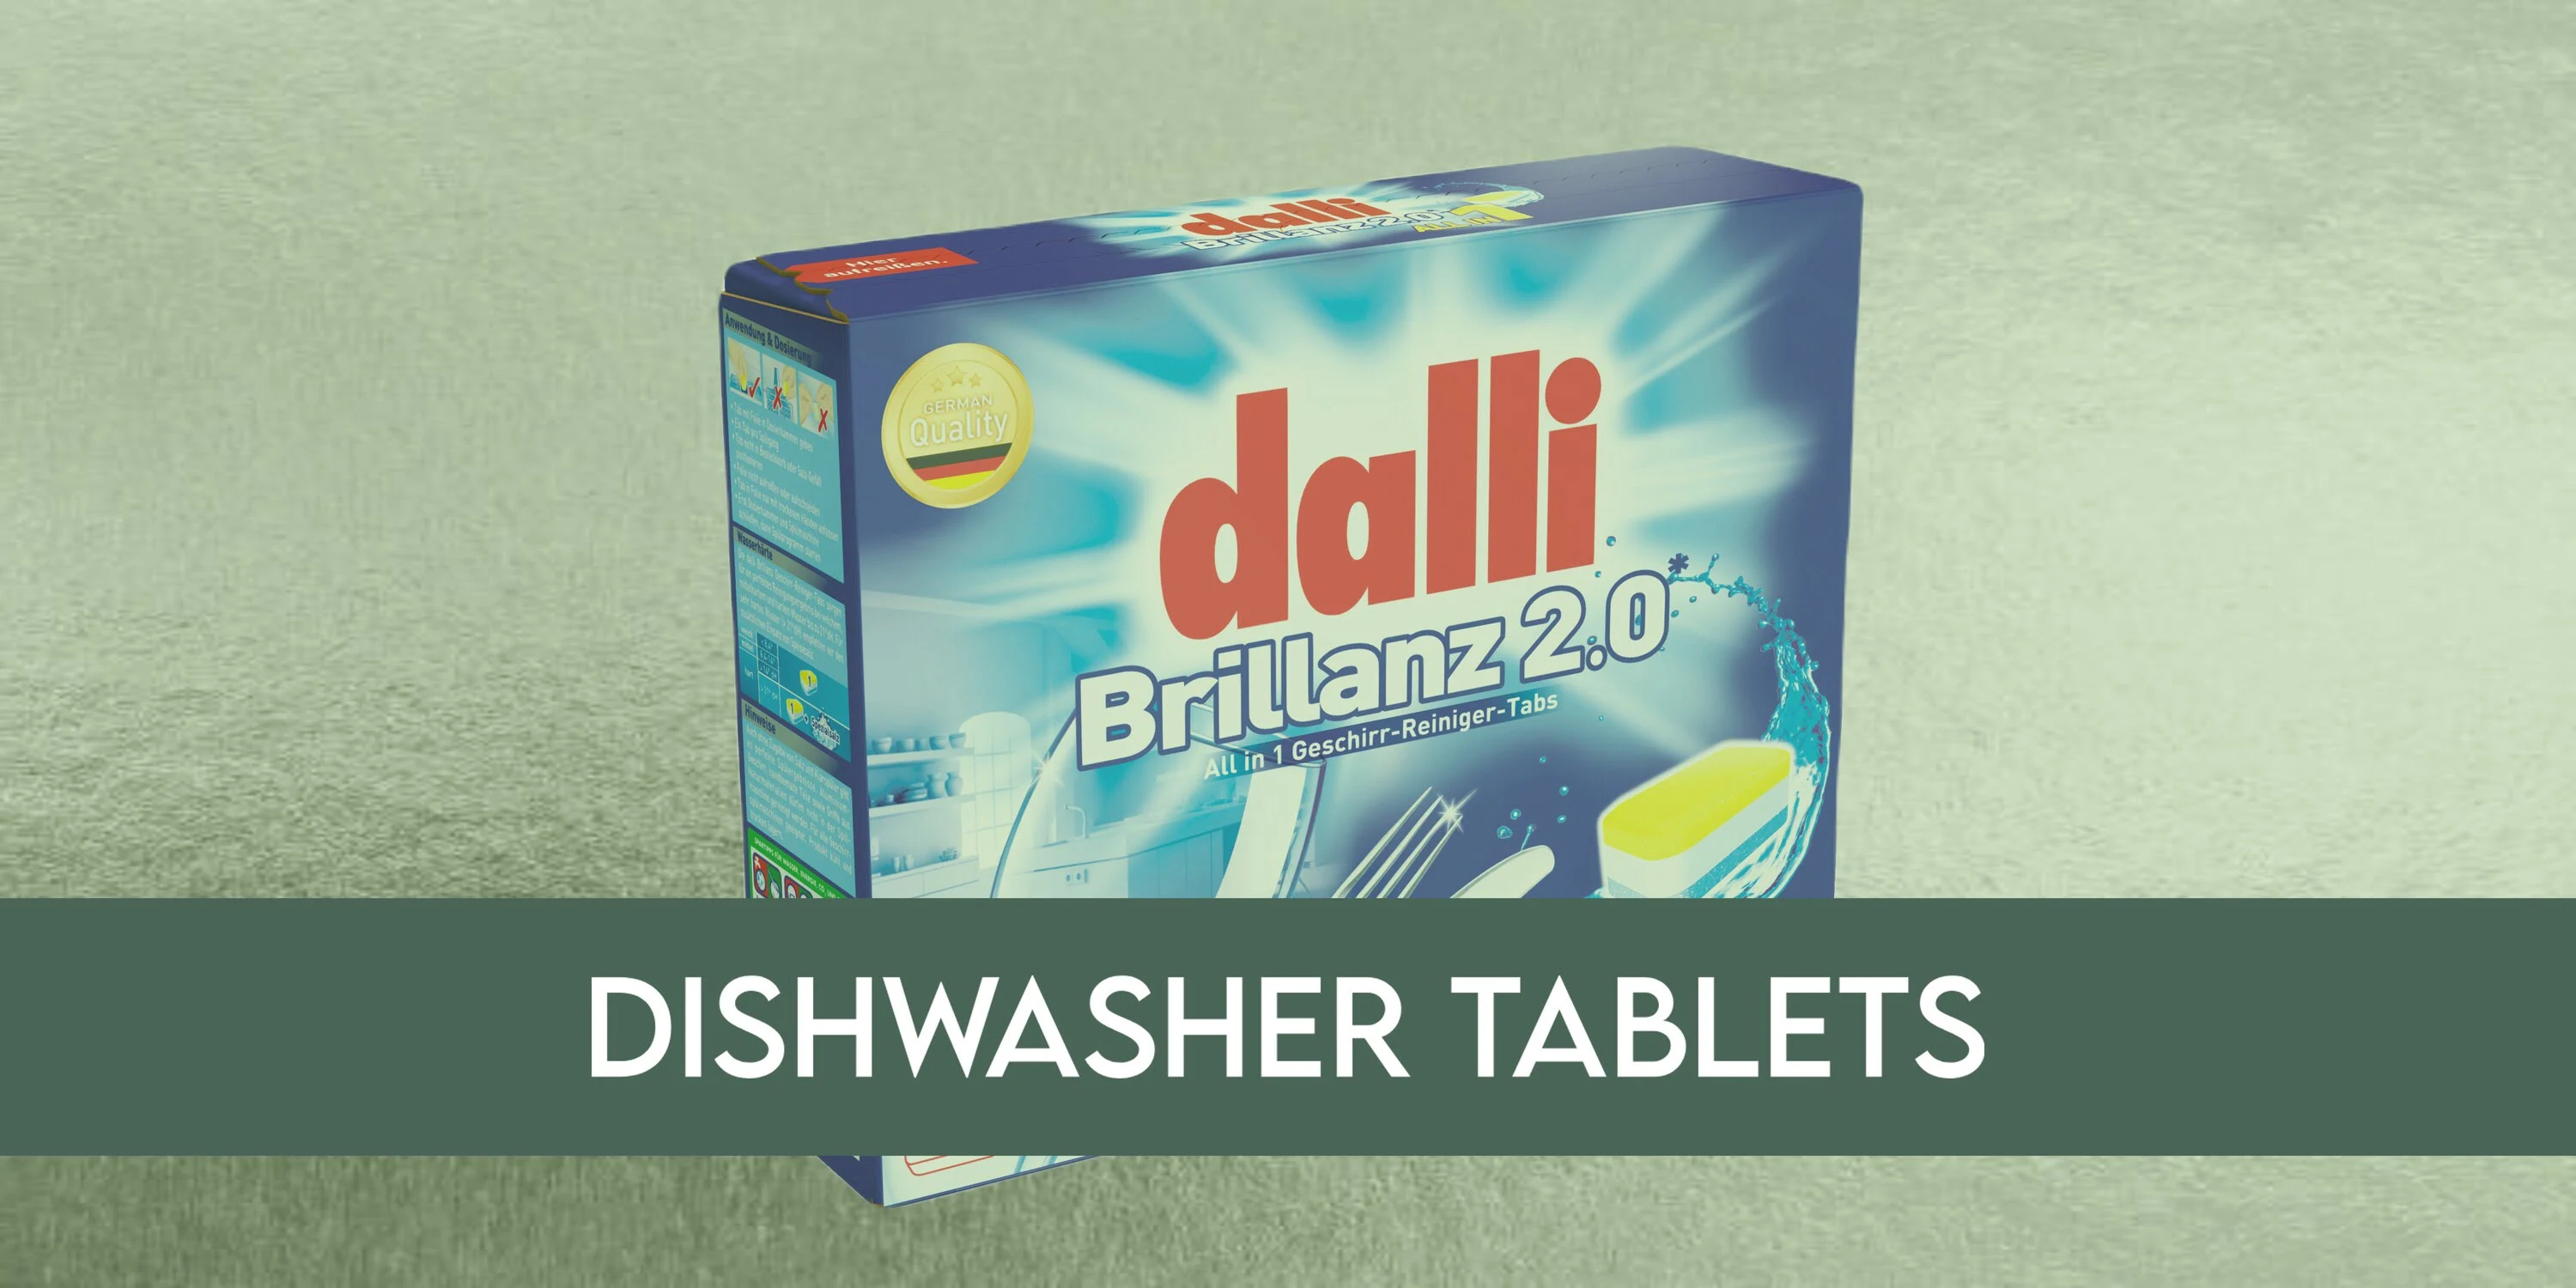 Dishwasher tablets all in one